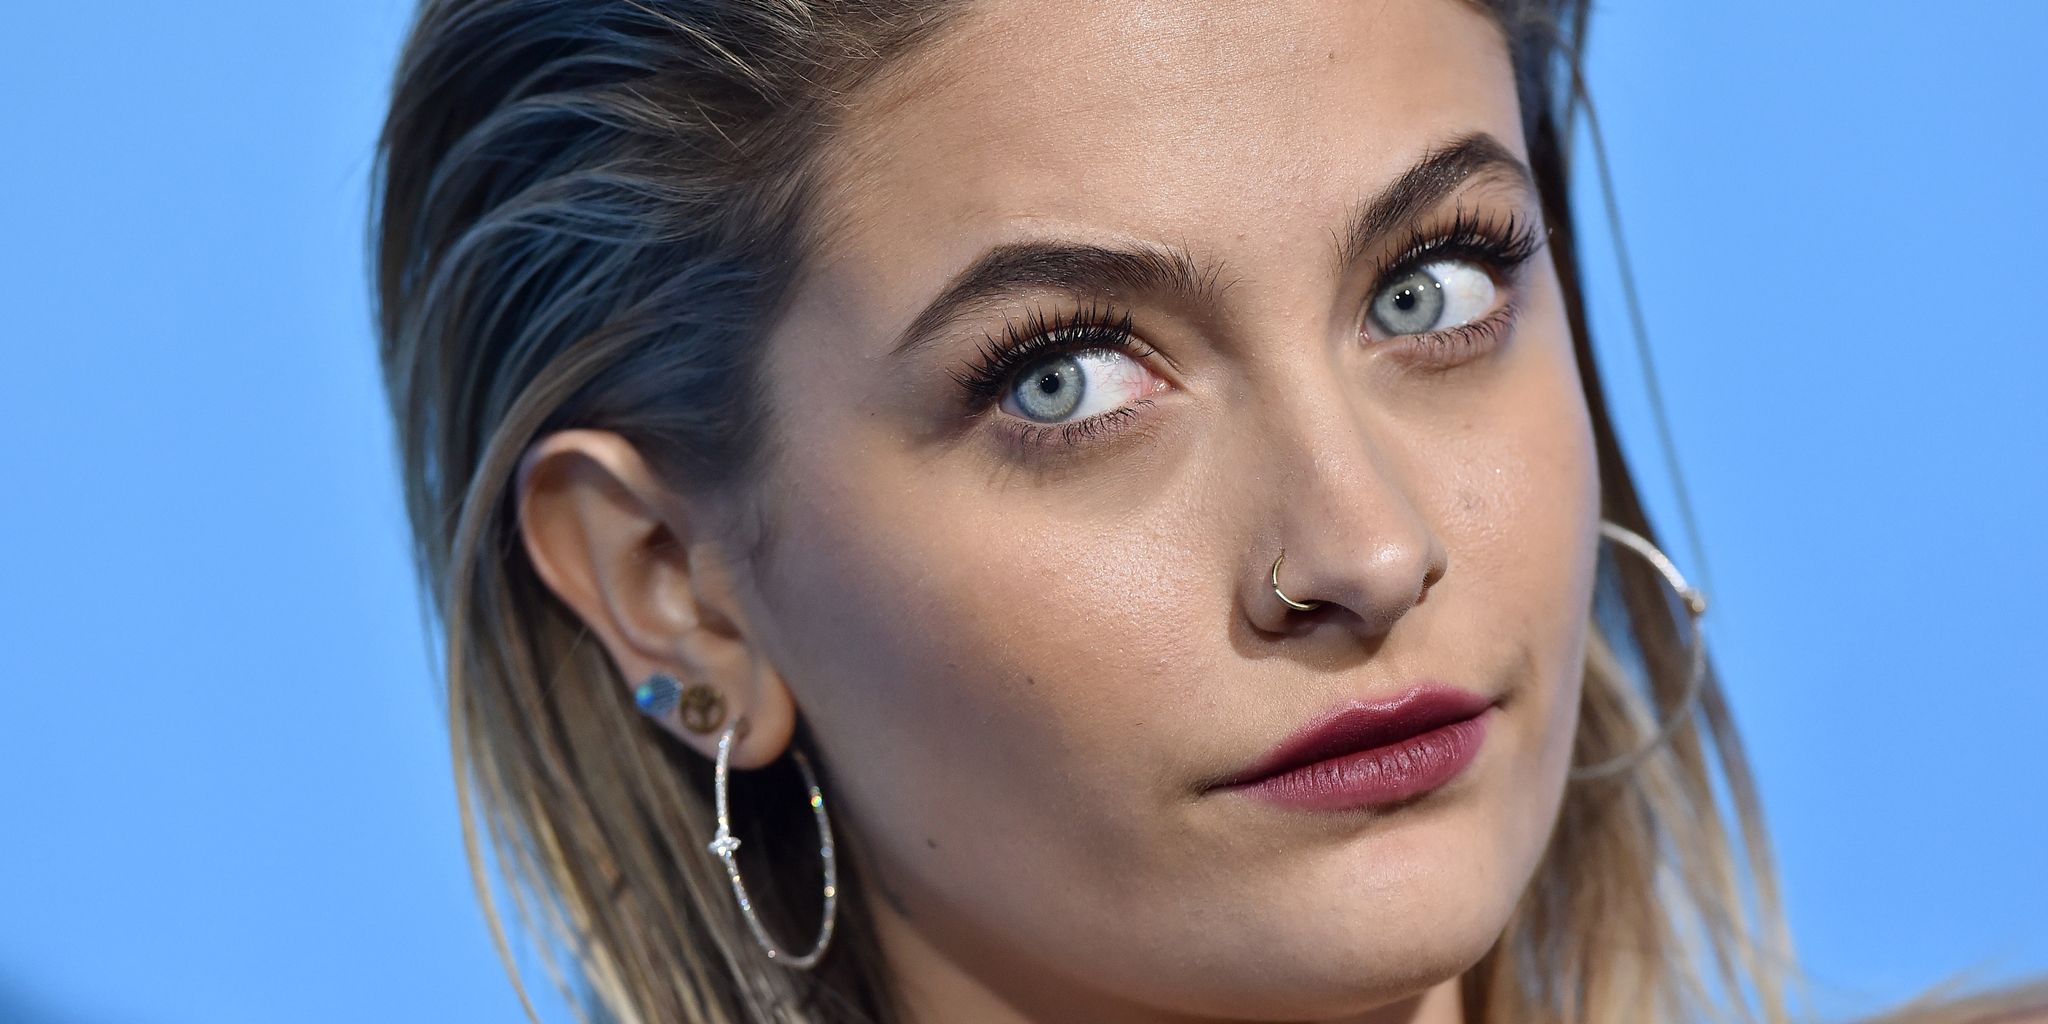 Paris Jackson’s Alleged Stalker Arrested, Charged After History Of Trespassing